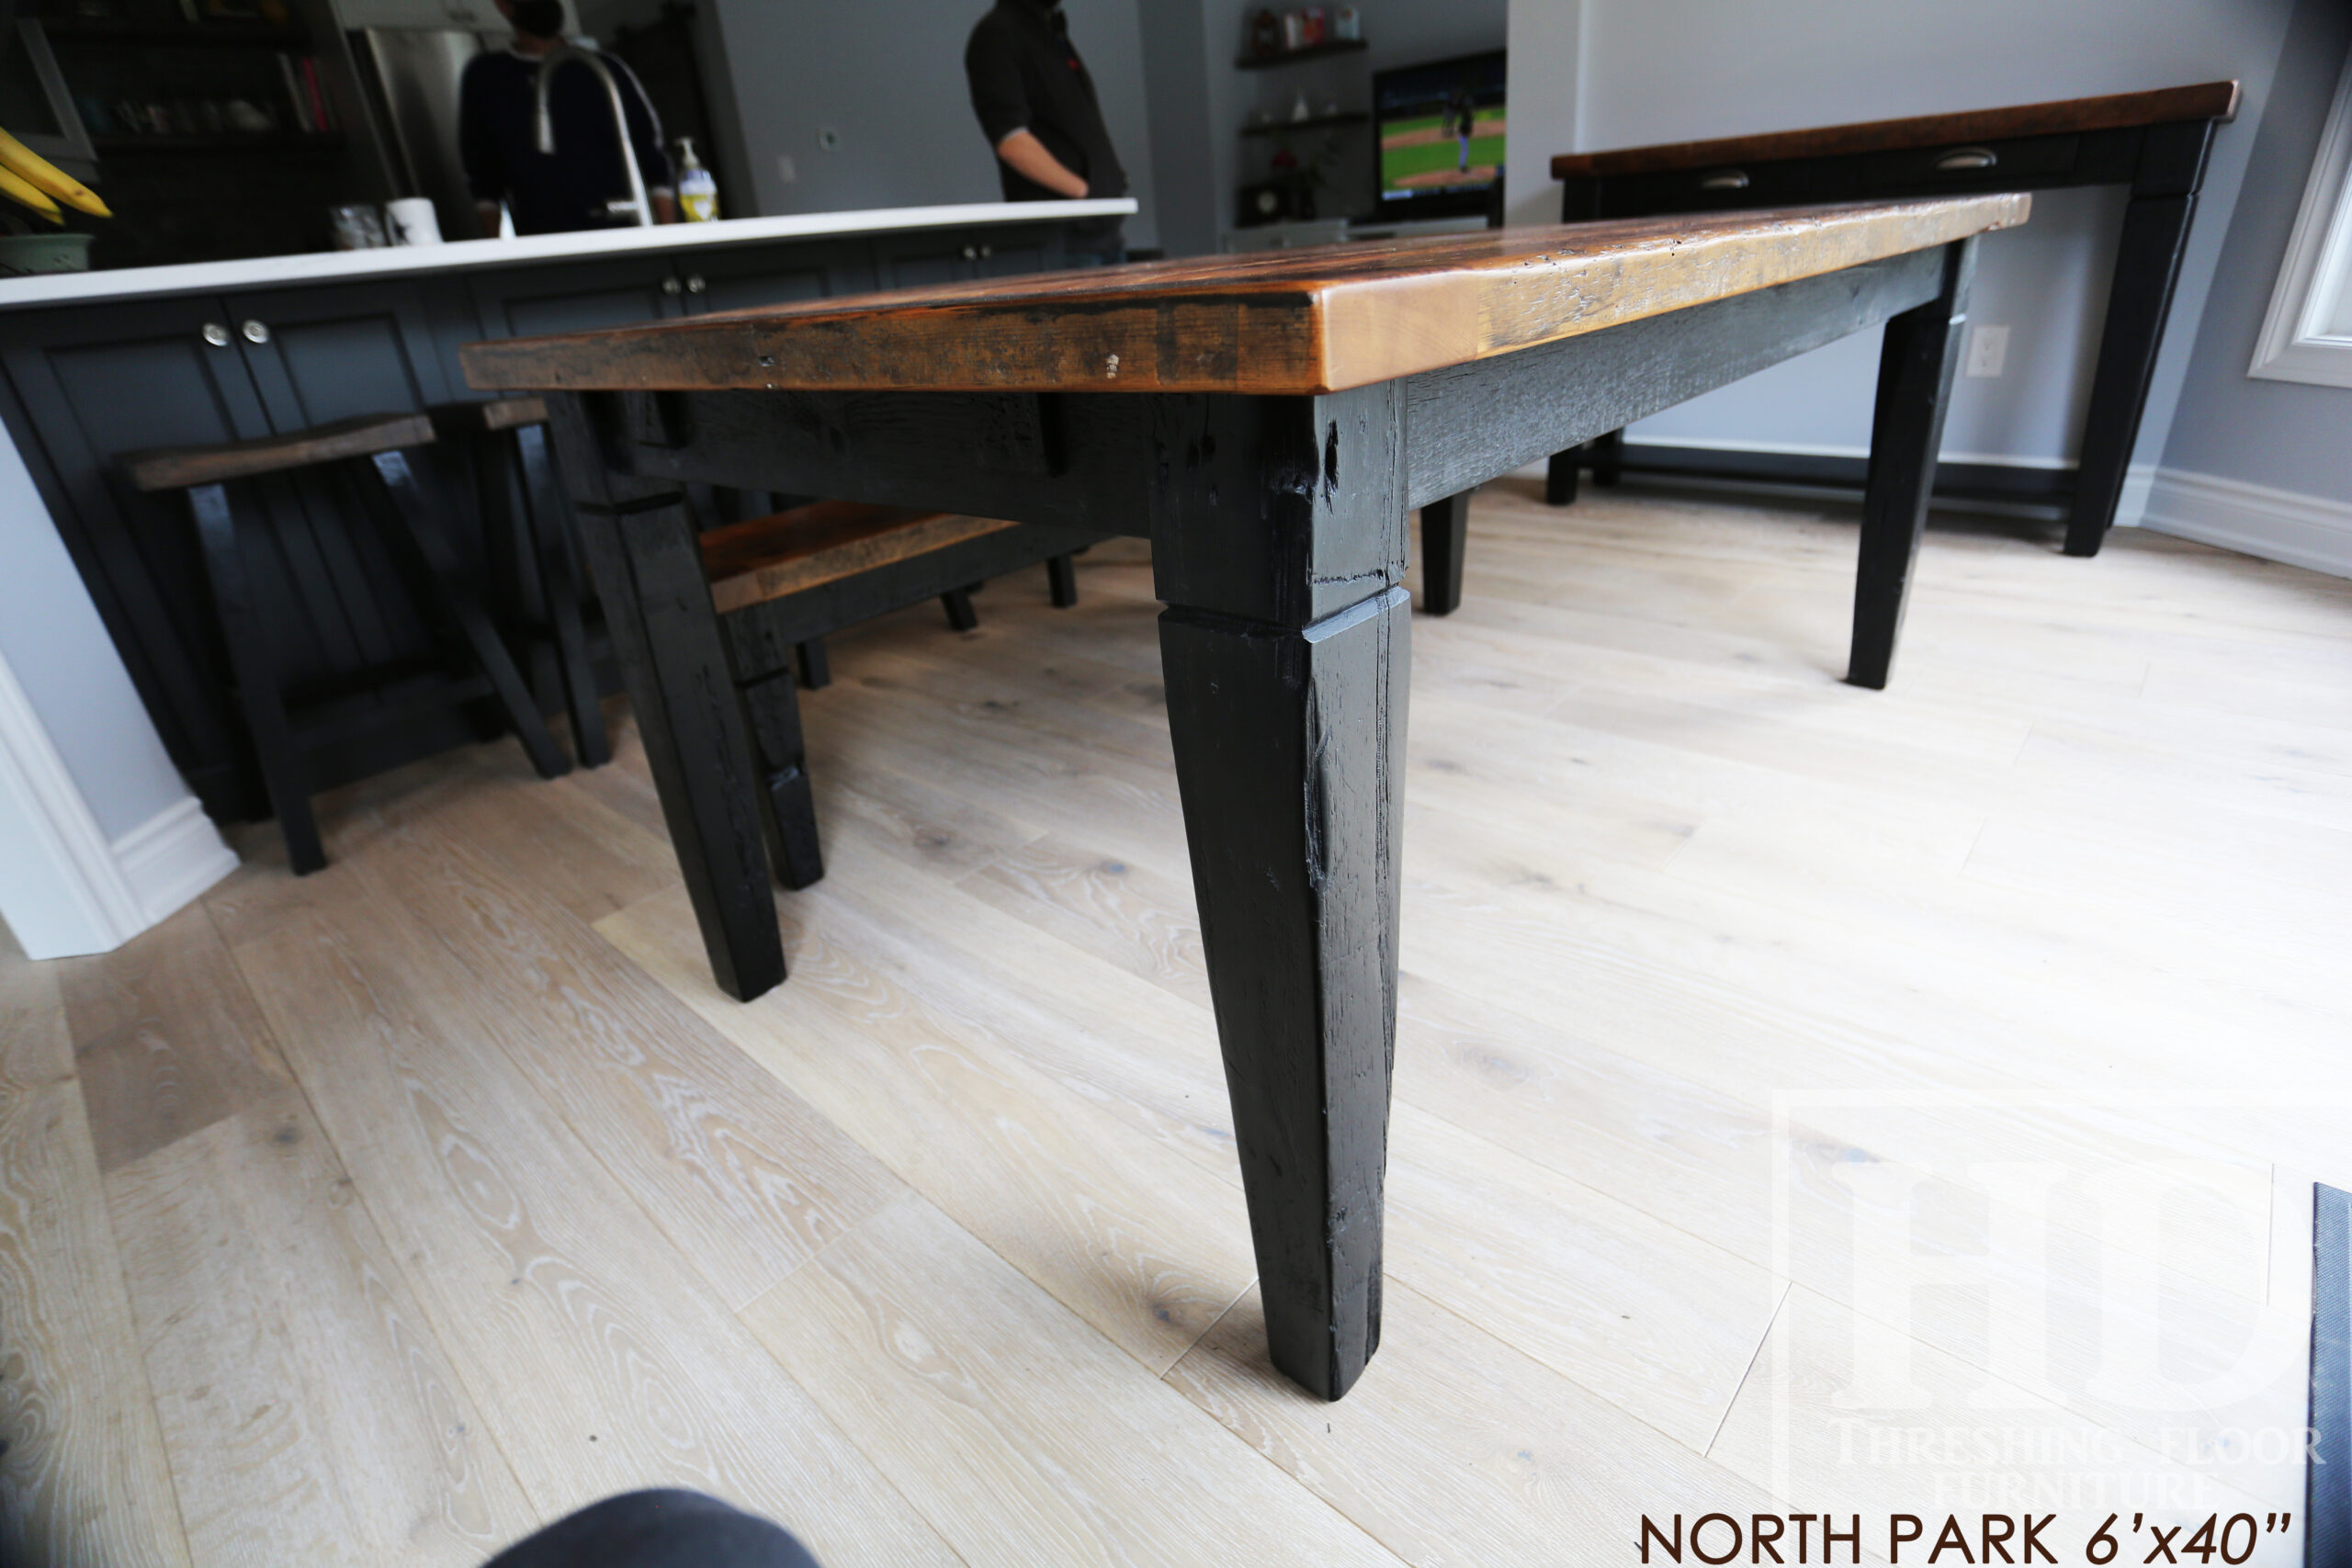 6' Reclaimed Wood Harvest Table for a Mississauga, Ontario Home - 40" wide - Reclaimed Hemlock Threshing Floor Construction- Tapered with a Notch Windbrace Beam Legs - Original Distressing/Character/Edges Maintained - Matte polyurethane finish [no epoxy] - Two 12" Leaves - 5' [matching] Bench - www.table.ca